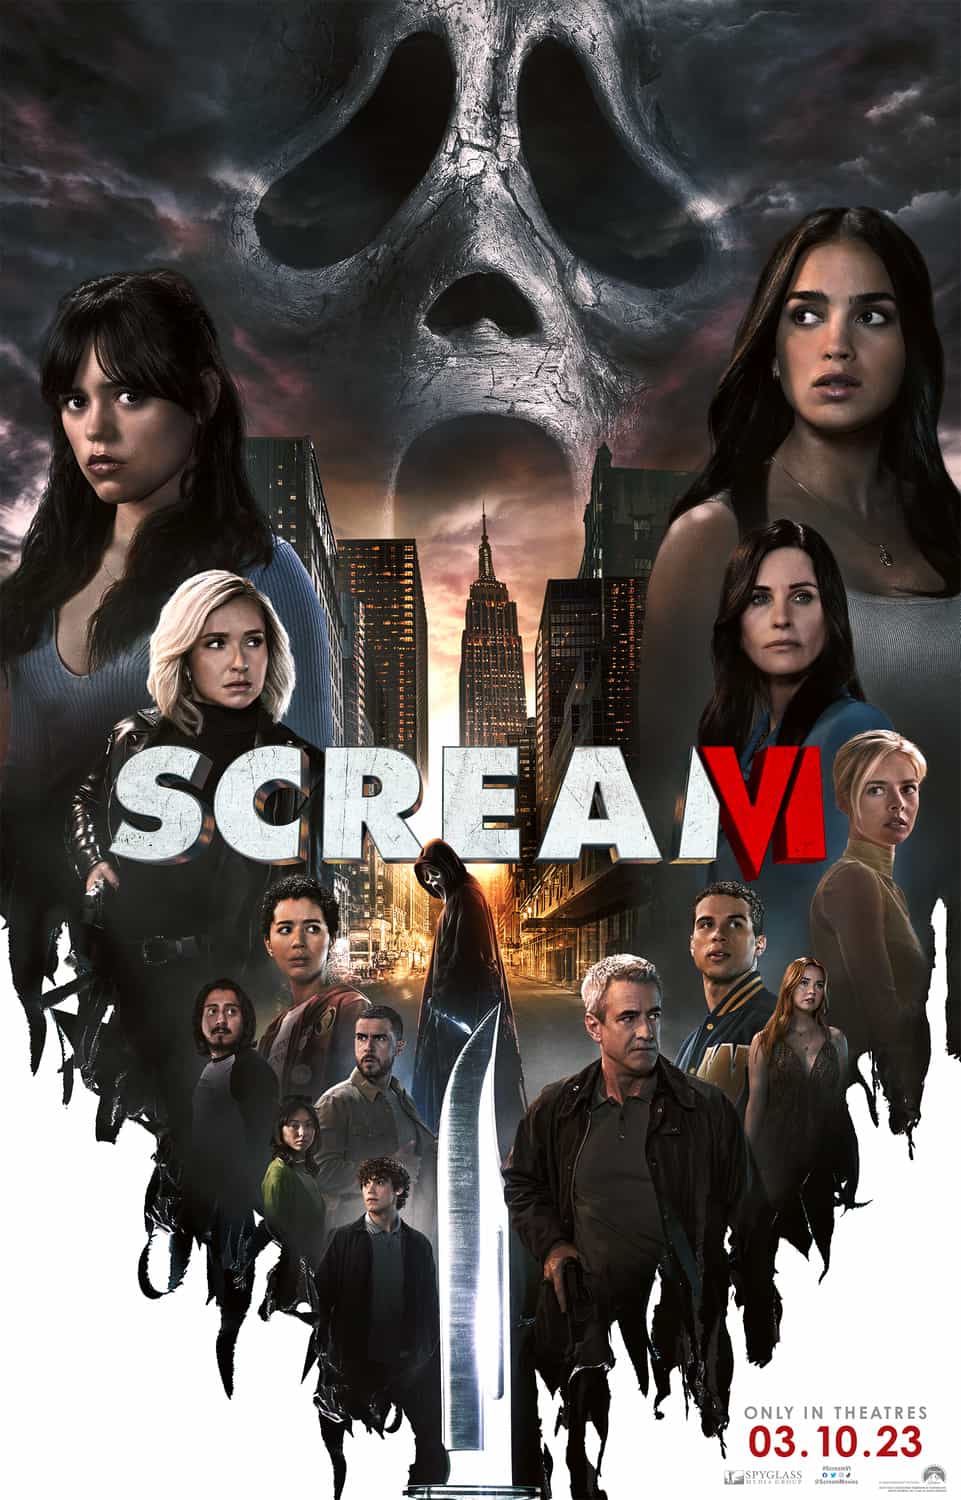 US Box Office Weekend Report 10th - 12th March 2023:  Scream VI is the top new movie of the weekend with a US debut gross of $44.5 Million, a series high